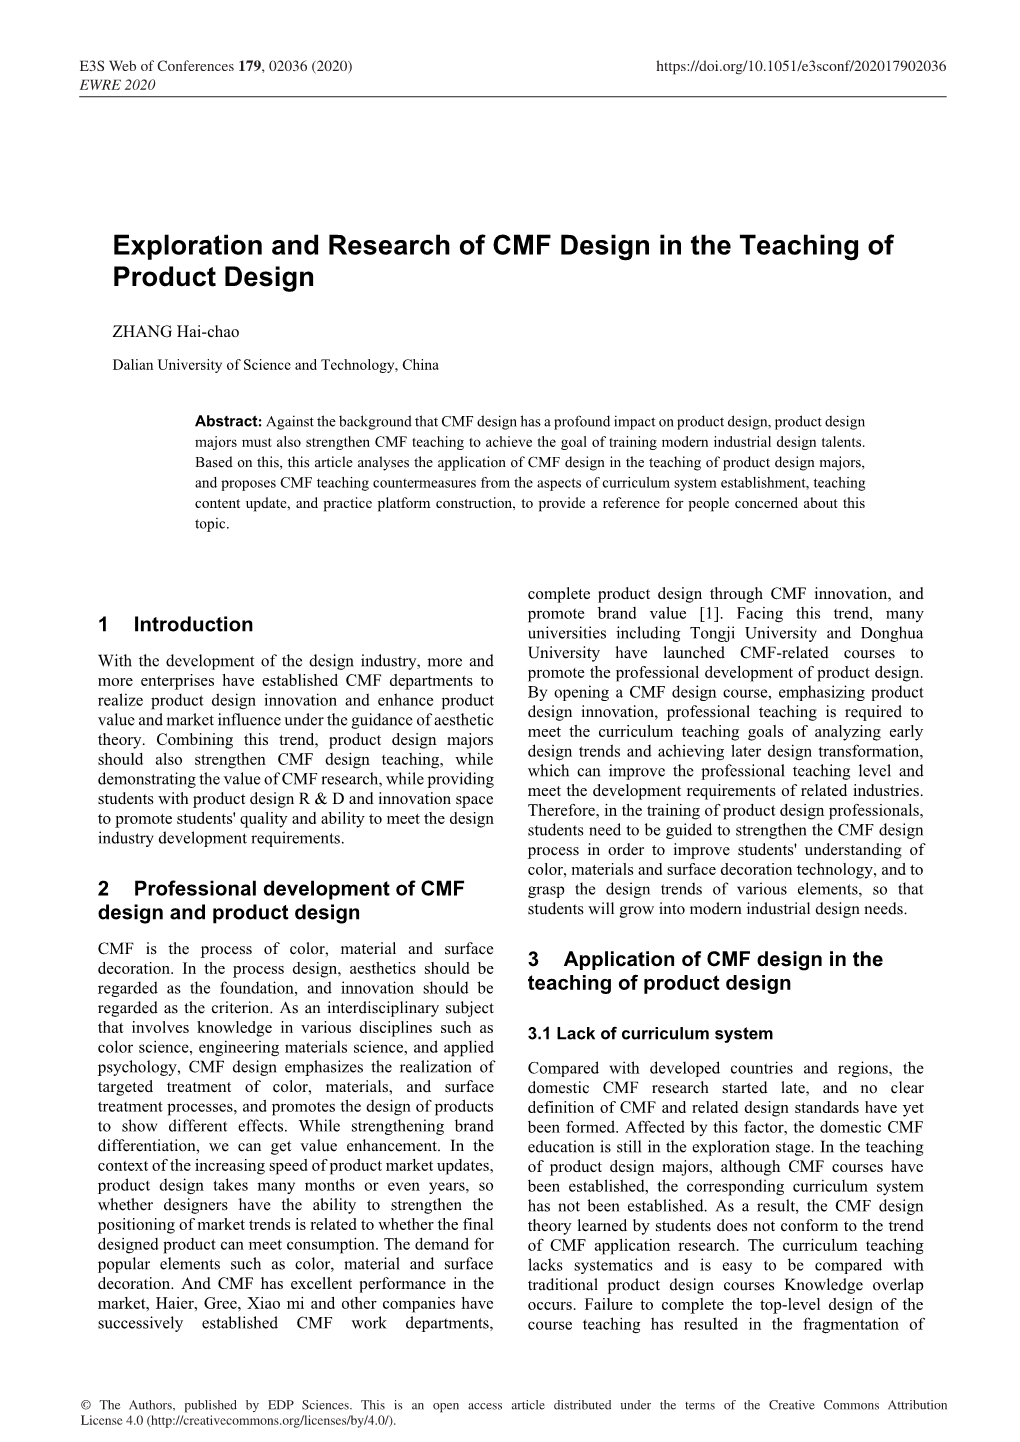 Exploration and Research of CMF Design in the Teaching of Product Design